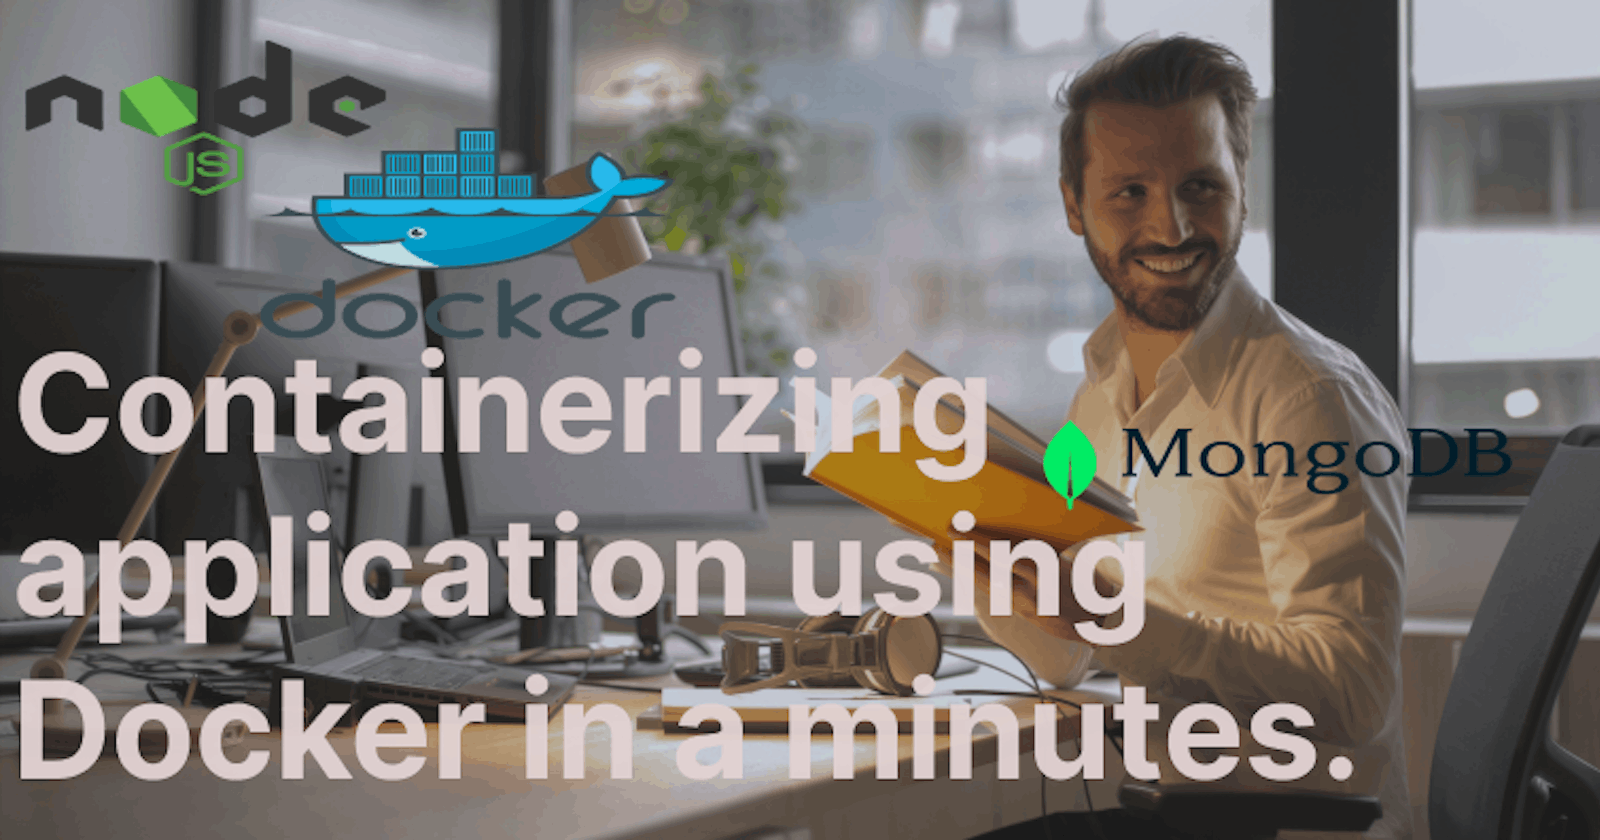 Containerizing a node and mongodb application using Docker in a minute.